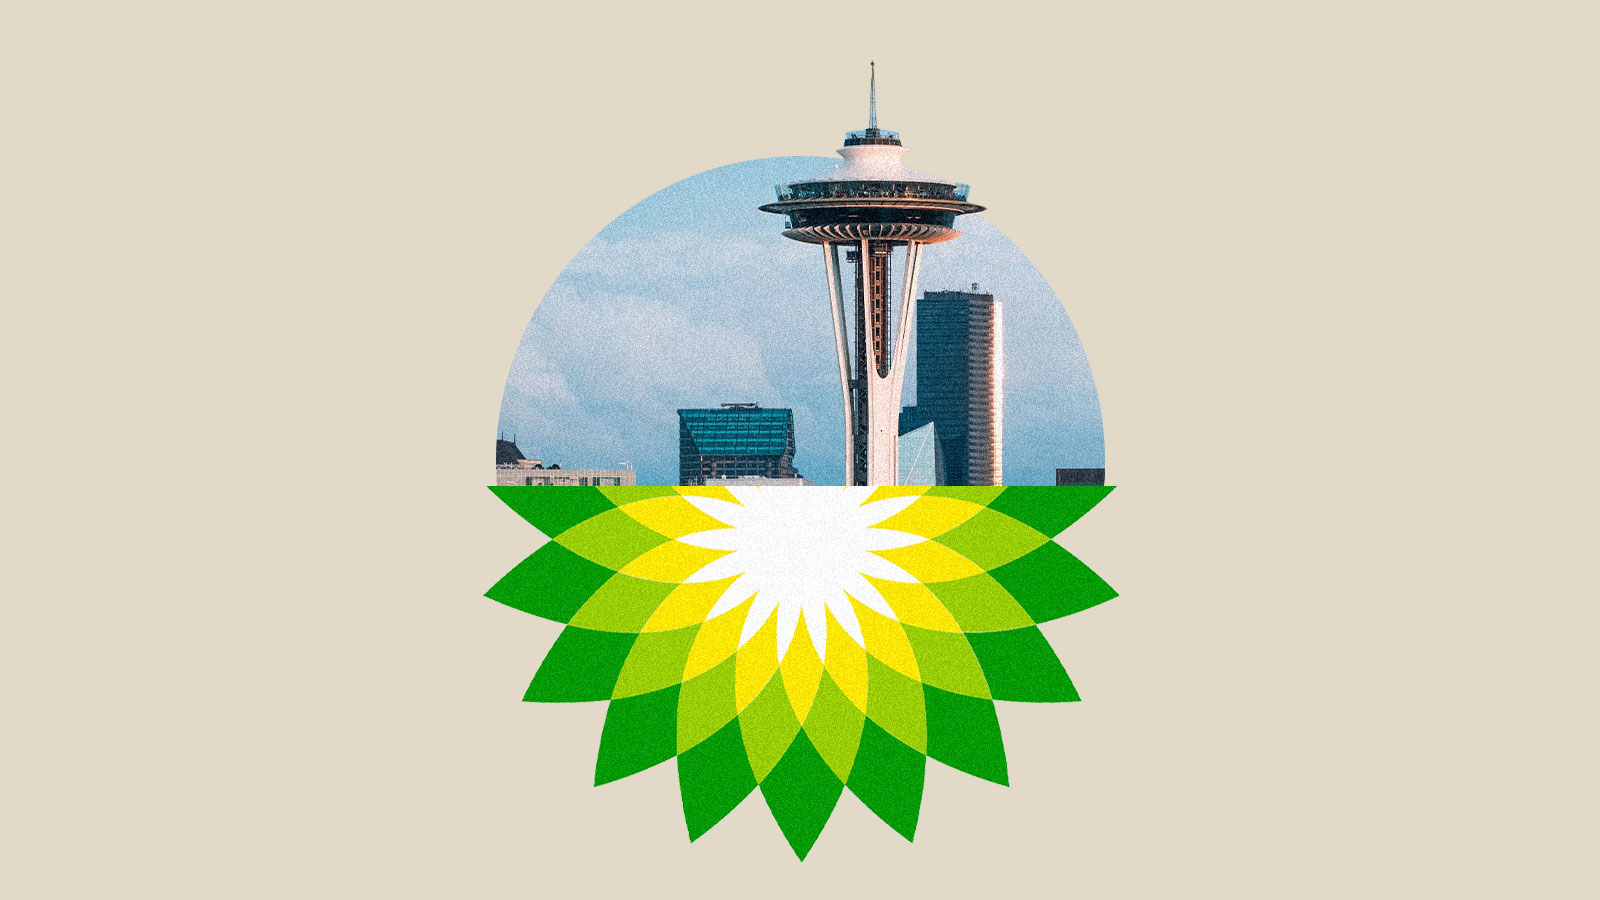 circular cutout of top half of Seattle's Space Needle on top of bottom half of BP logo